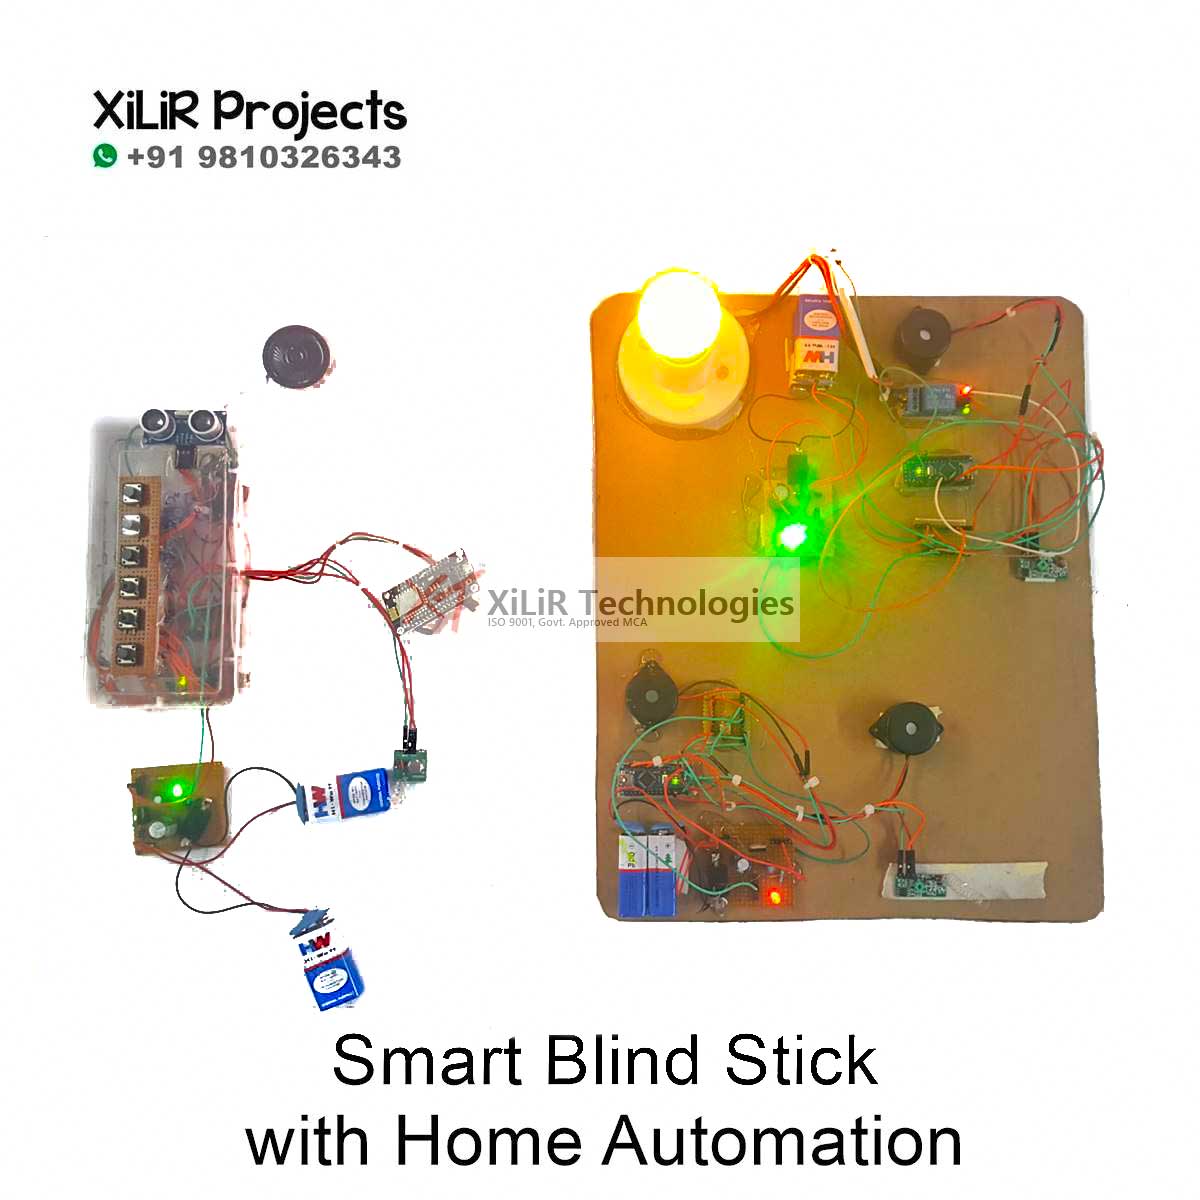 38.-Smart-Blind-Stick-with-Homeautomation.jpg